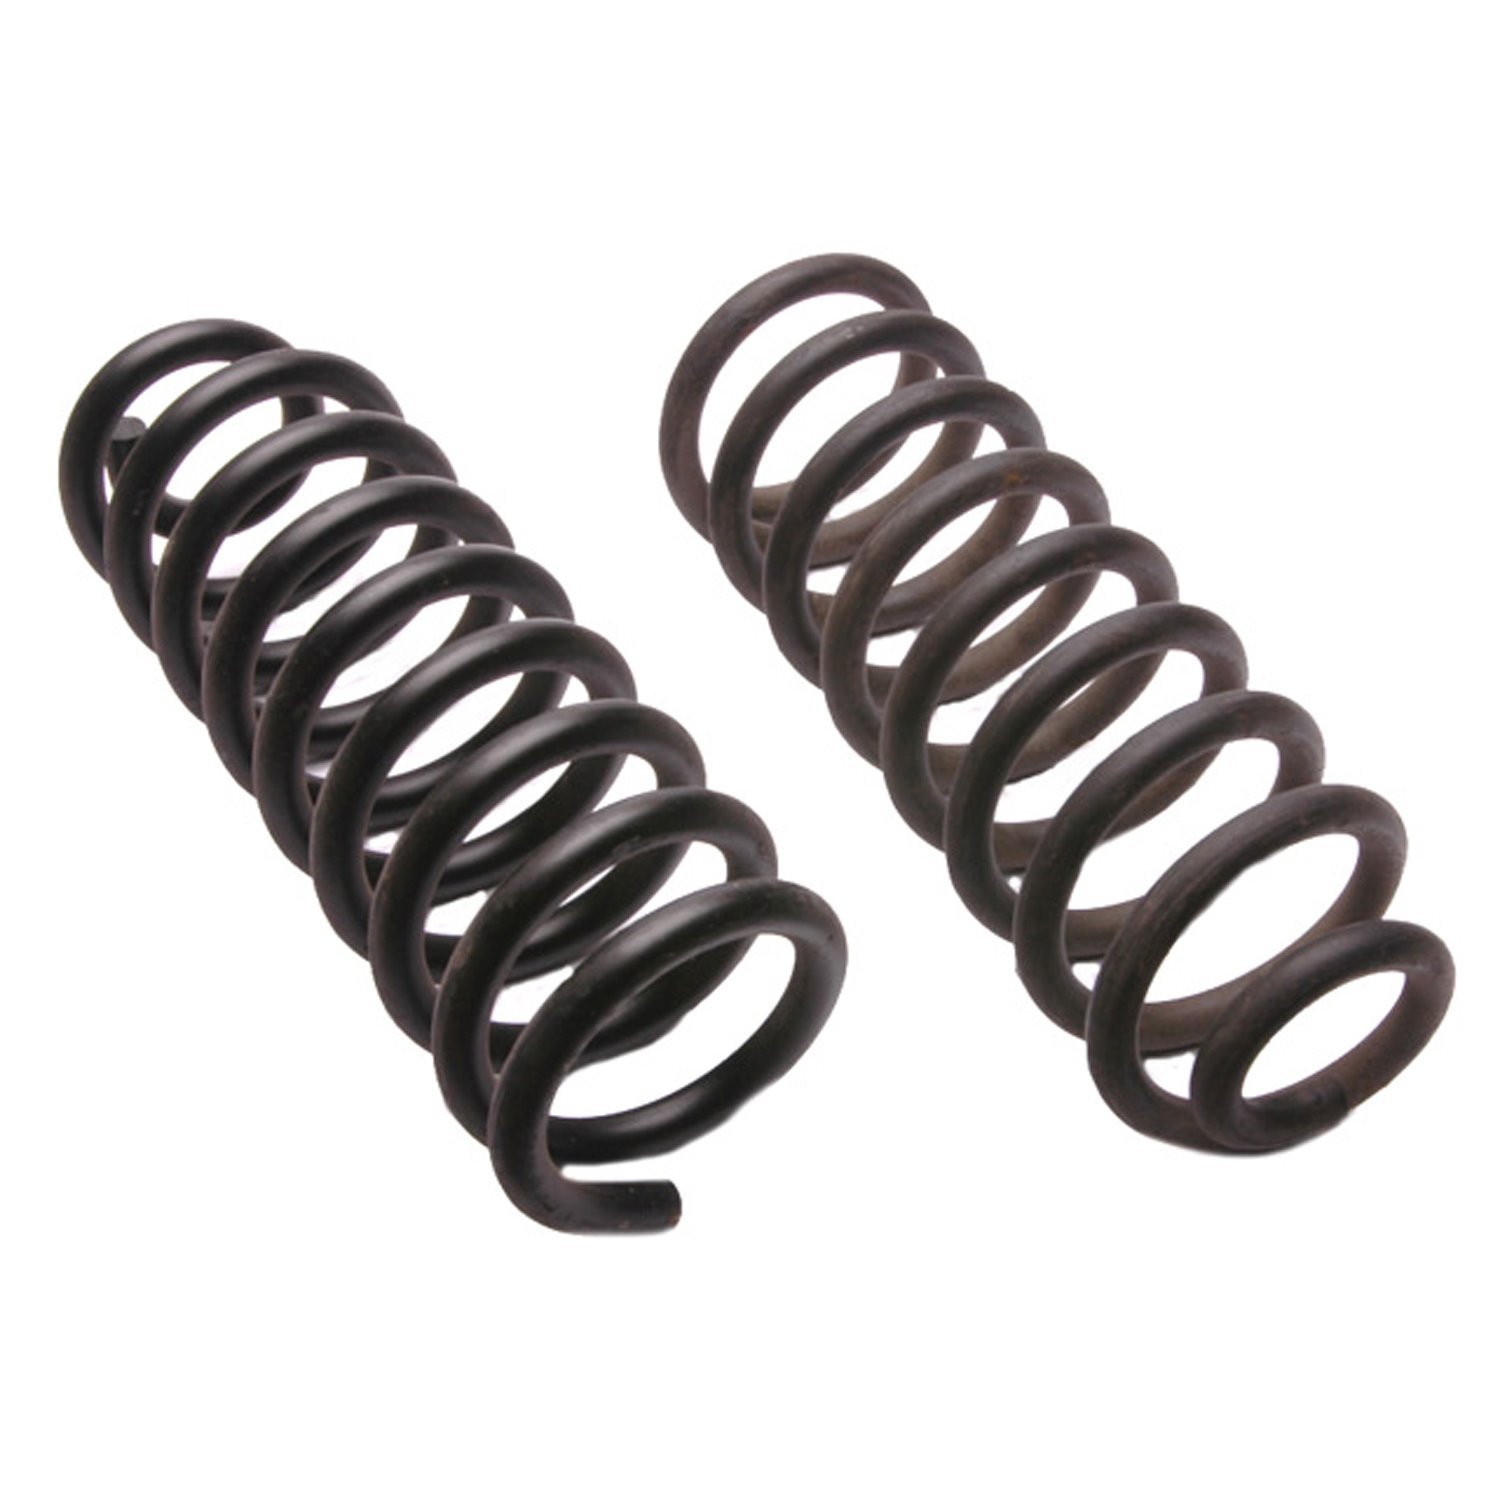 Front Coil Springs 1965-1979 Ford F100 4WD, 1975 Ford F150 2WD, 1975-1979 Ford F250 2WD